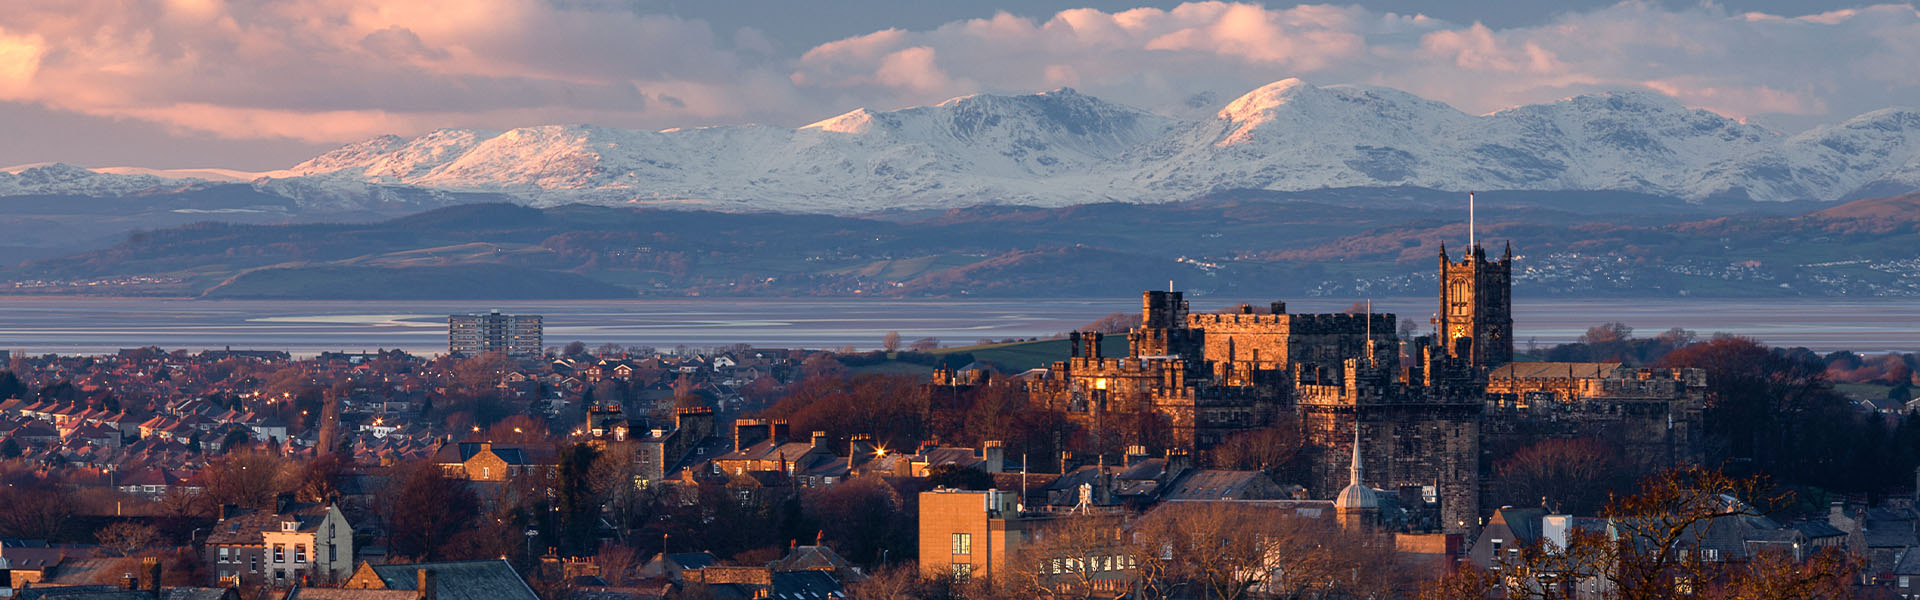 Lancaster skyline at sunset with snow-clad mountains in the background